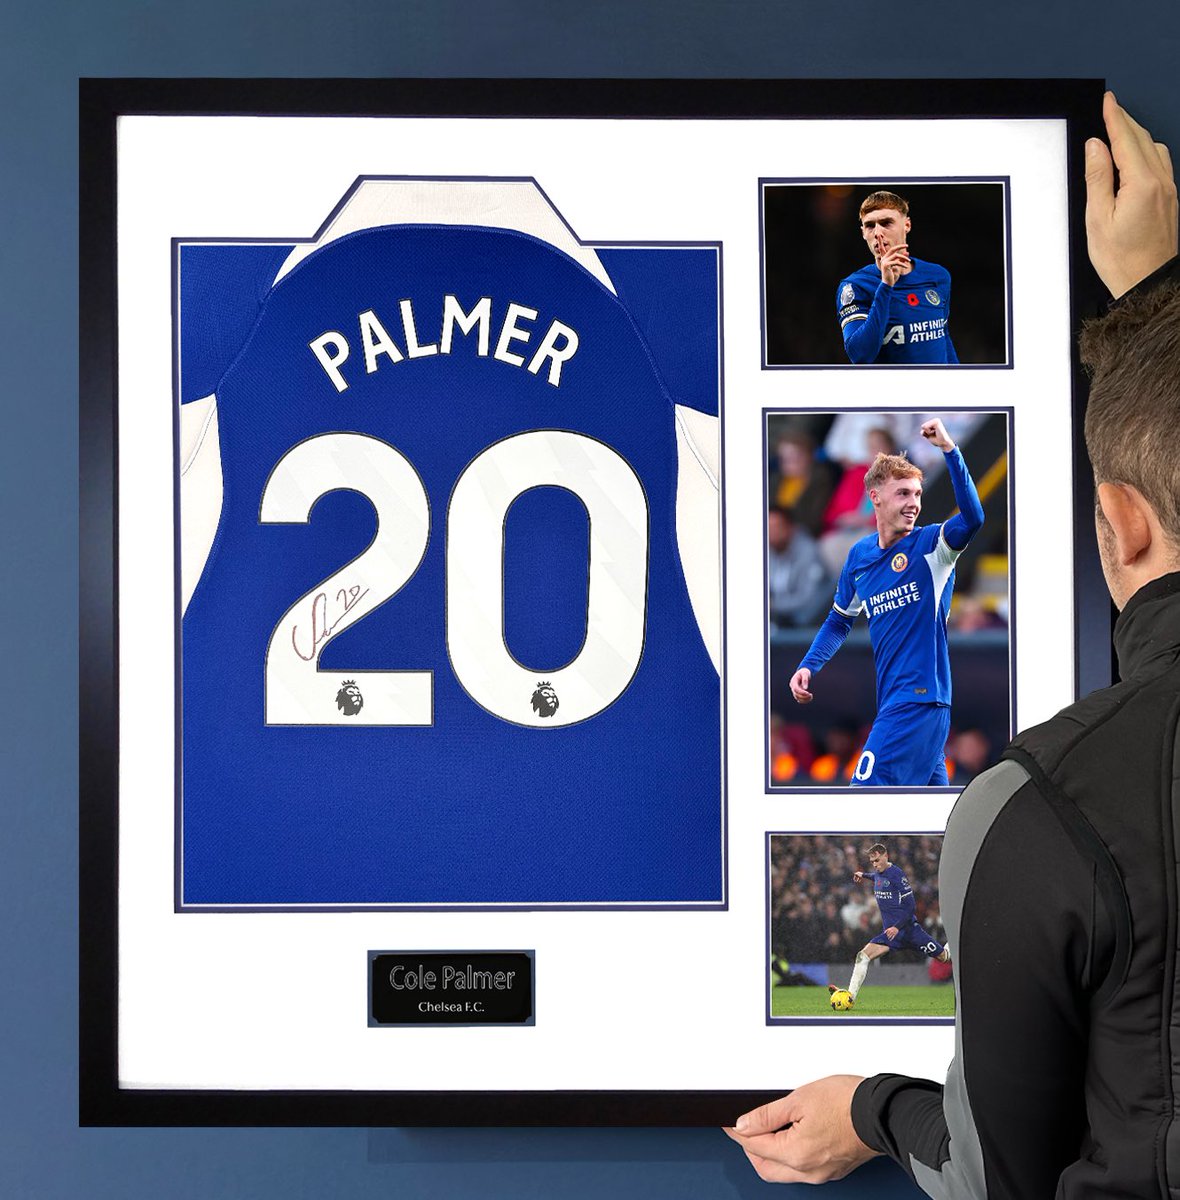 29 minutes played and Cole Palmer has a HAT-TRICK! 🔥 thefancavememorabilia.co.uk